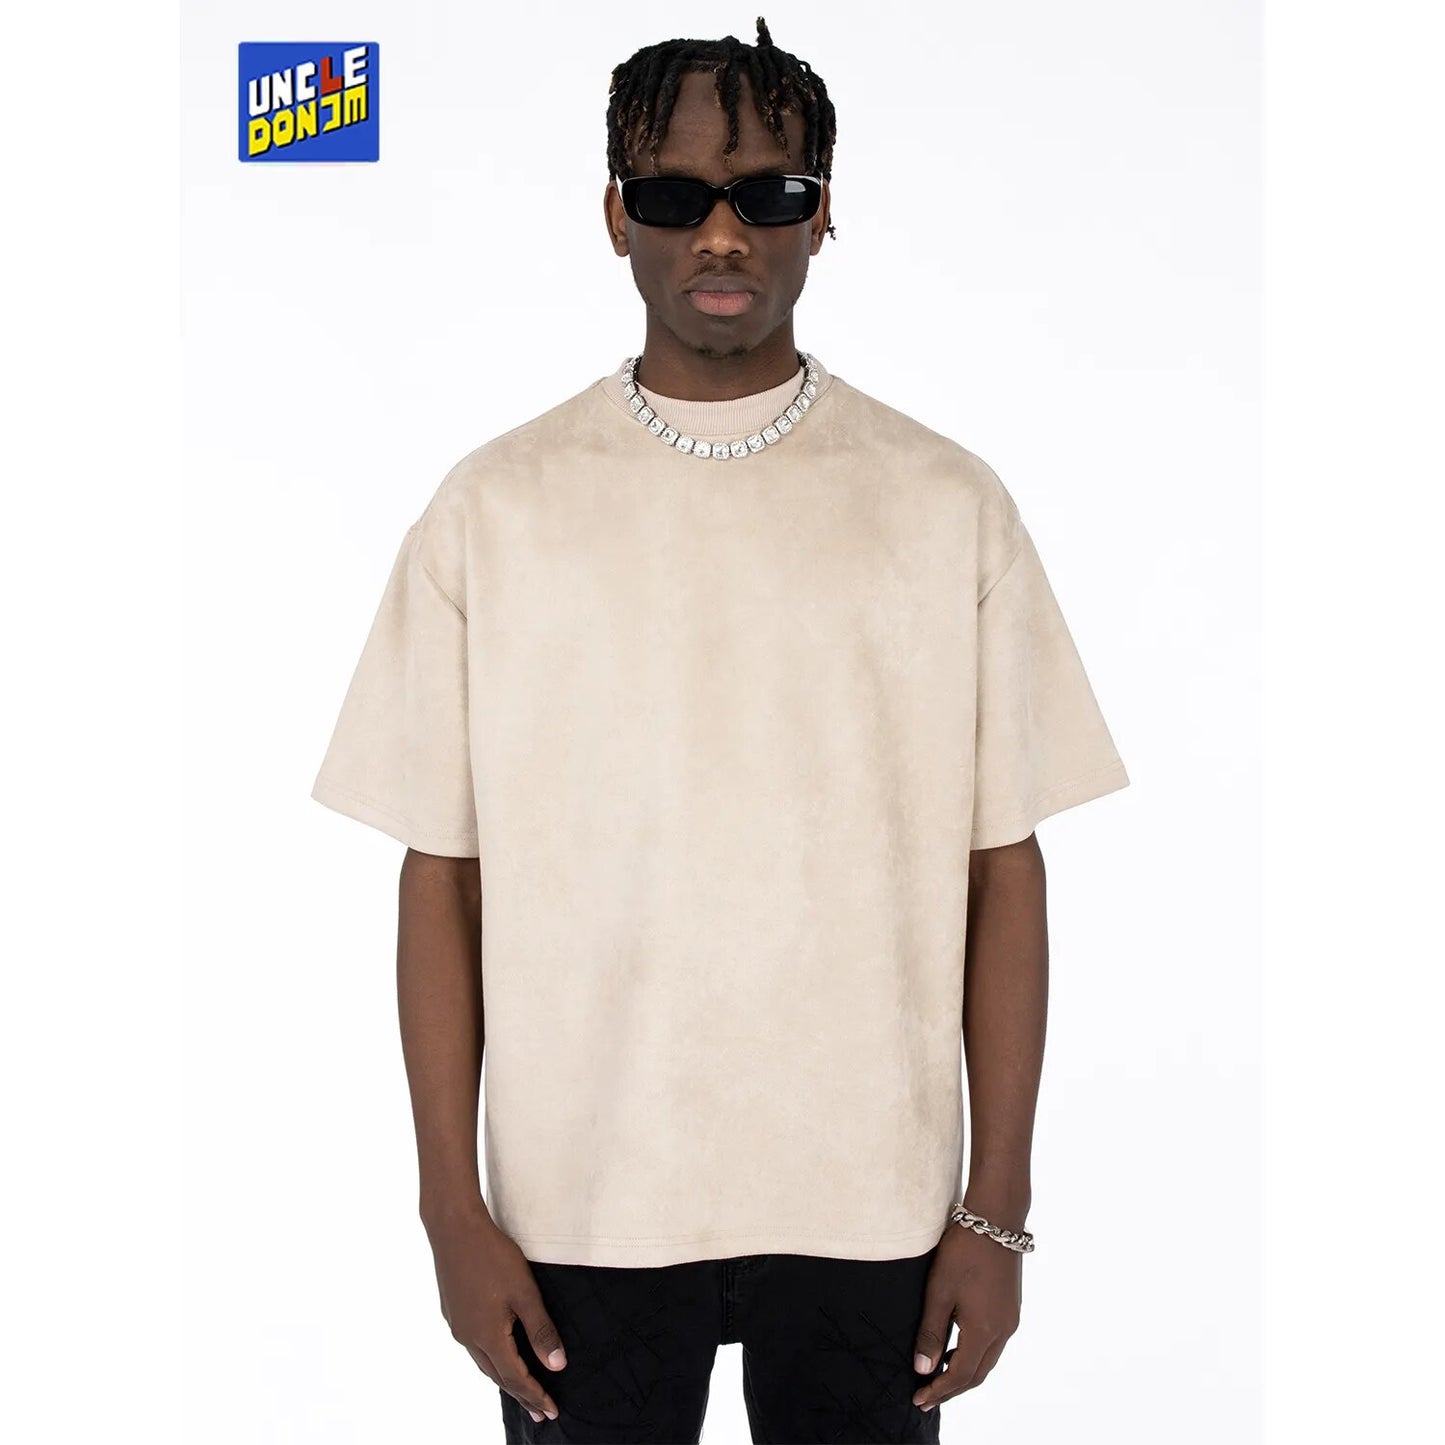 UncleDonJM Suede Embroidered Short Sleeve T-shirt